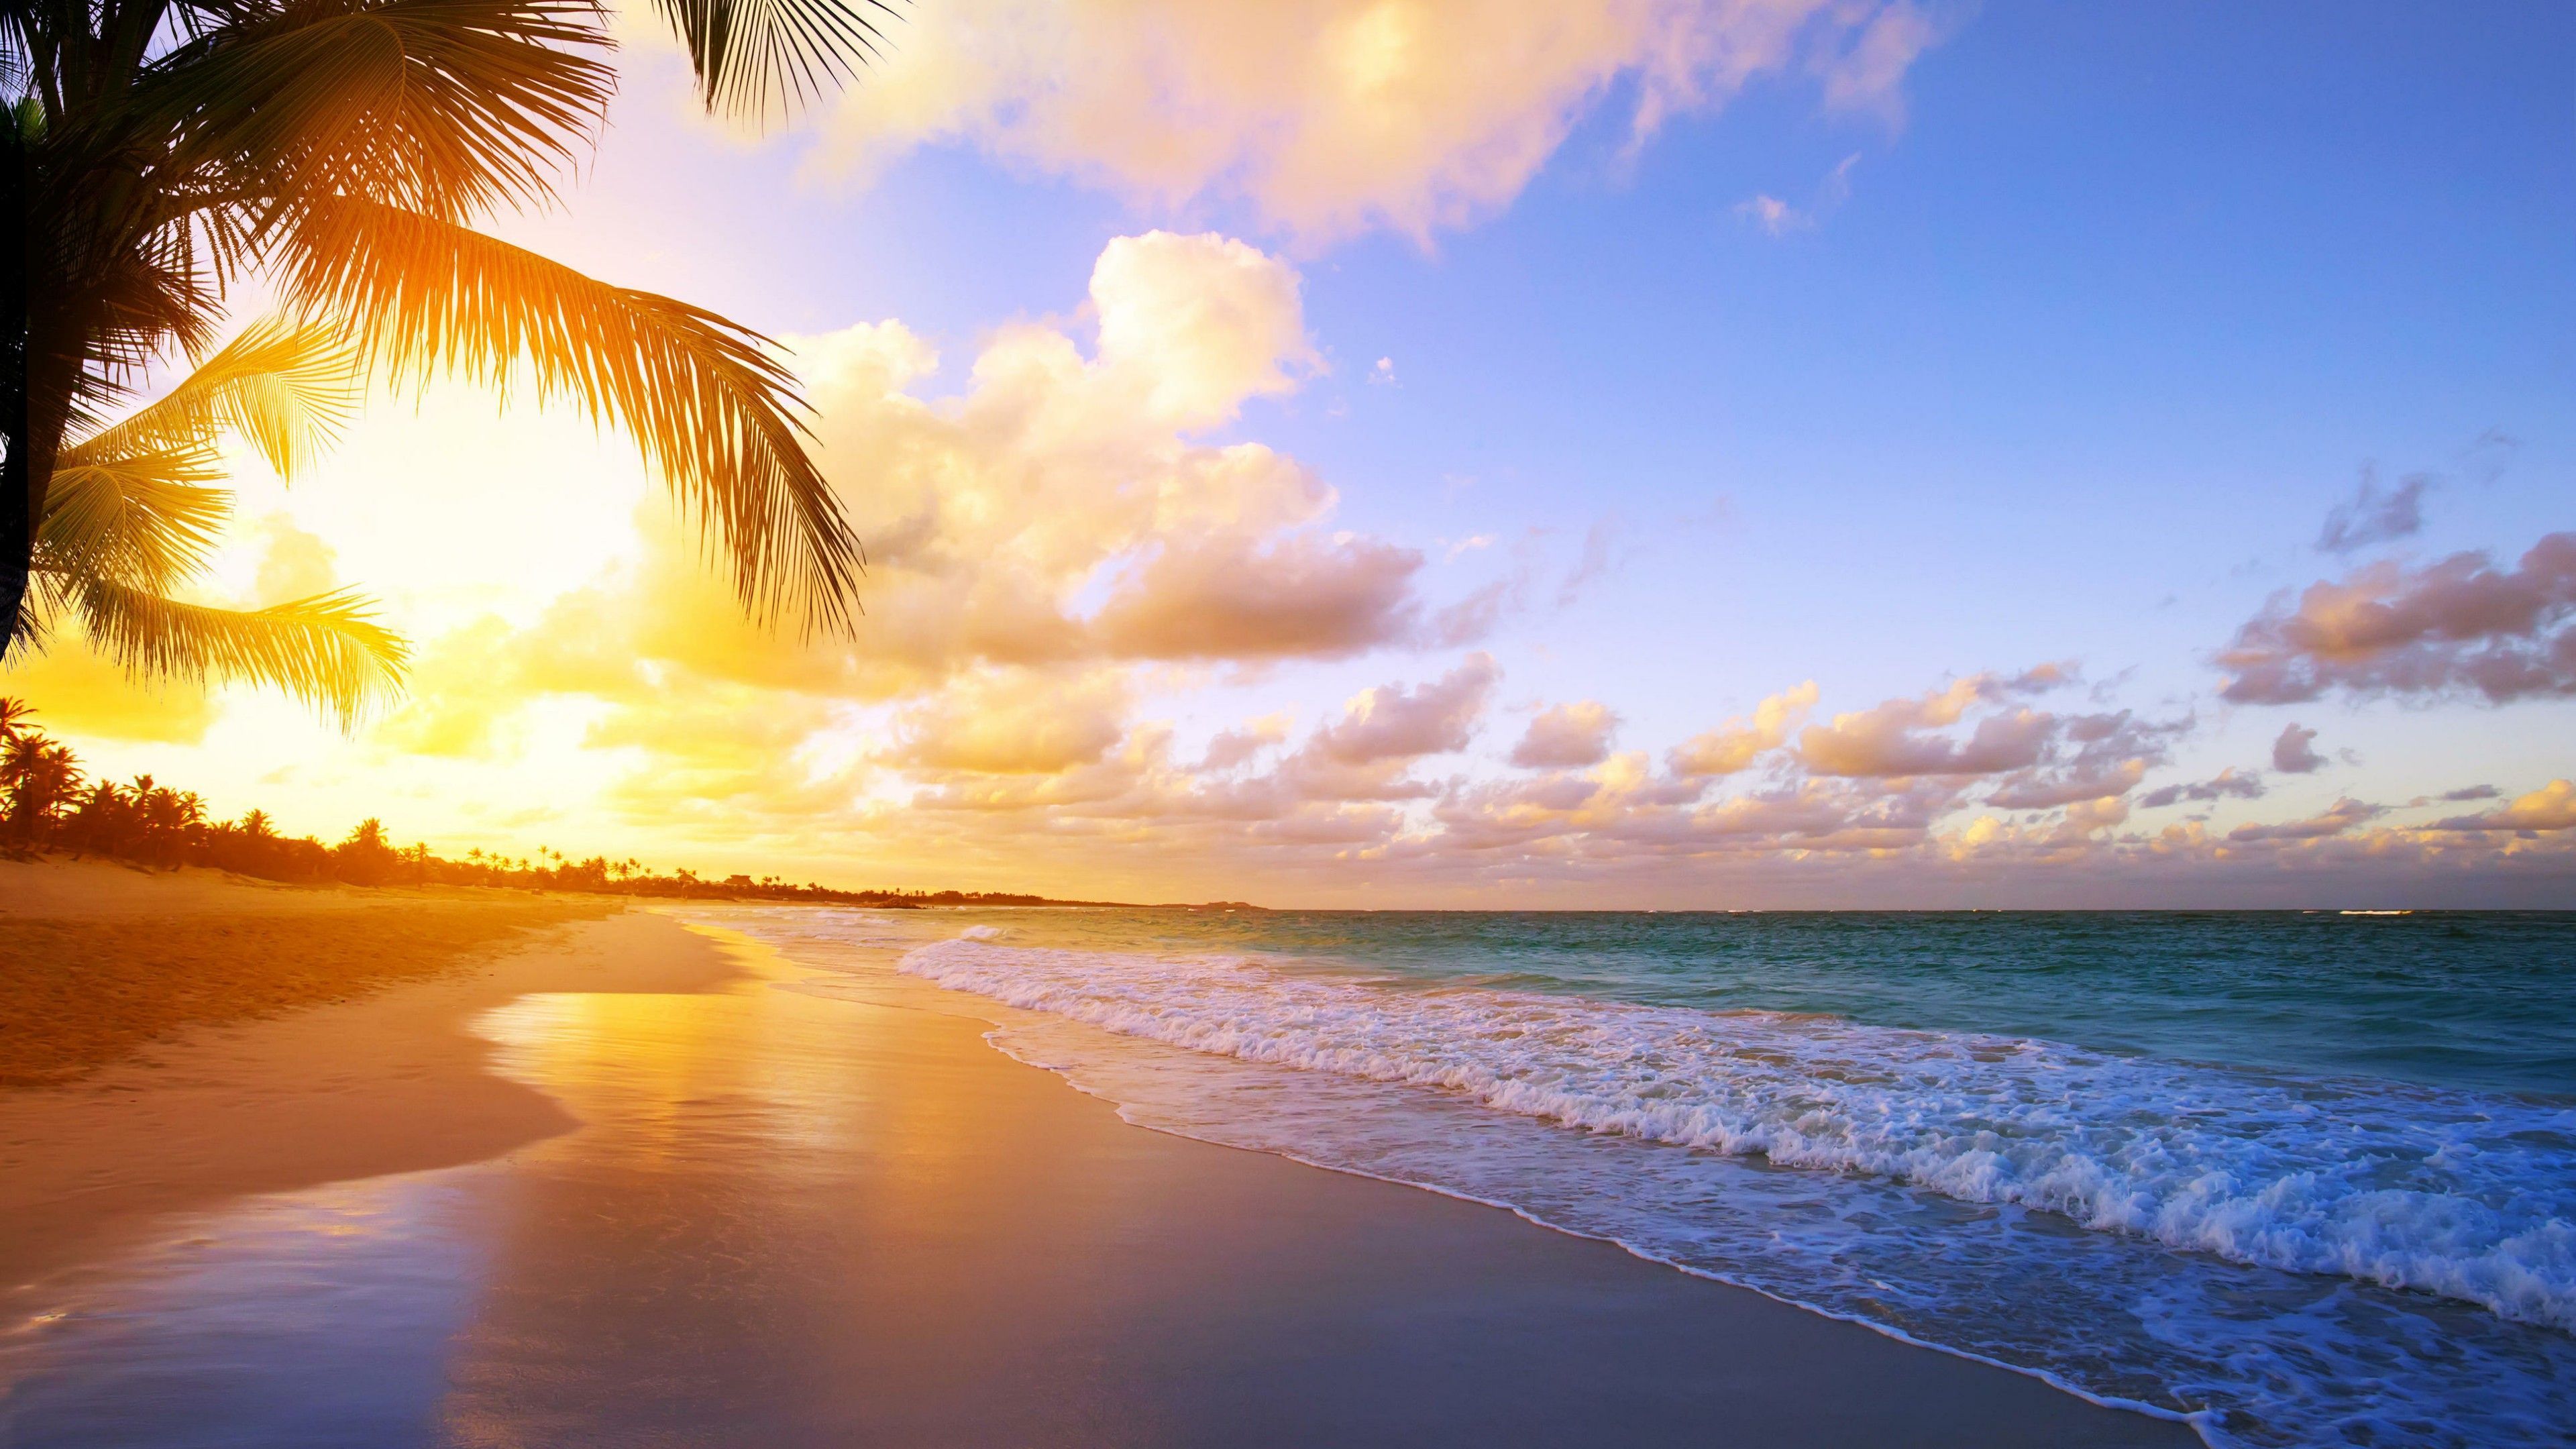 A beach with palm trees and the sun setting - Sunrise